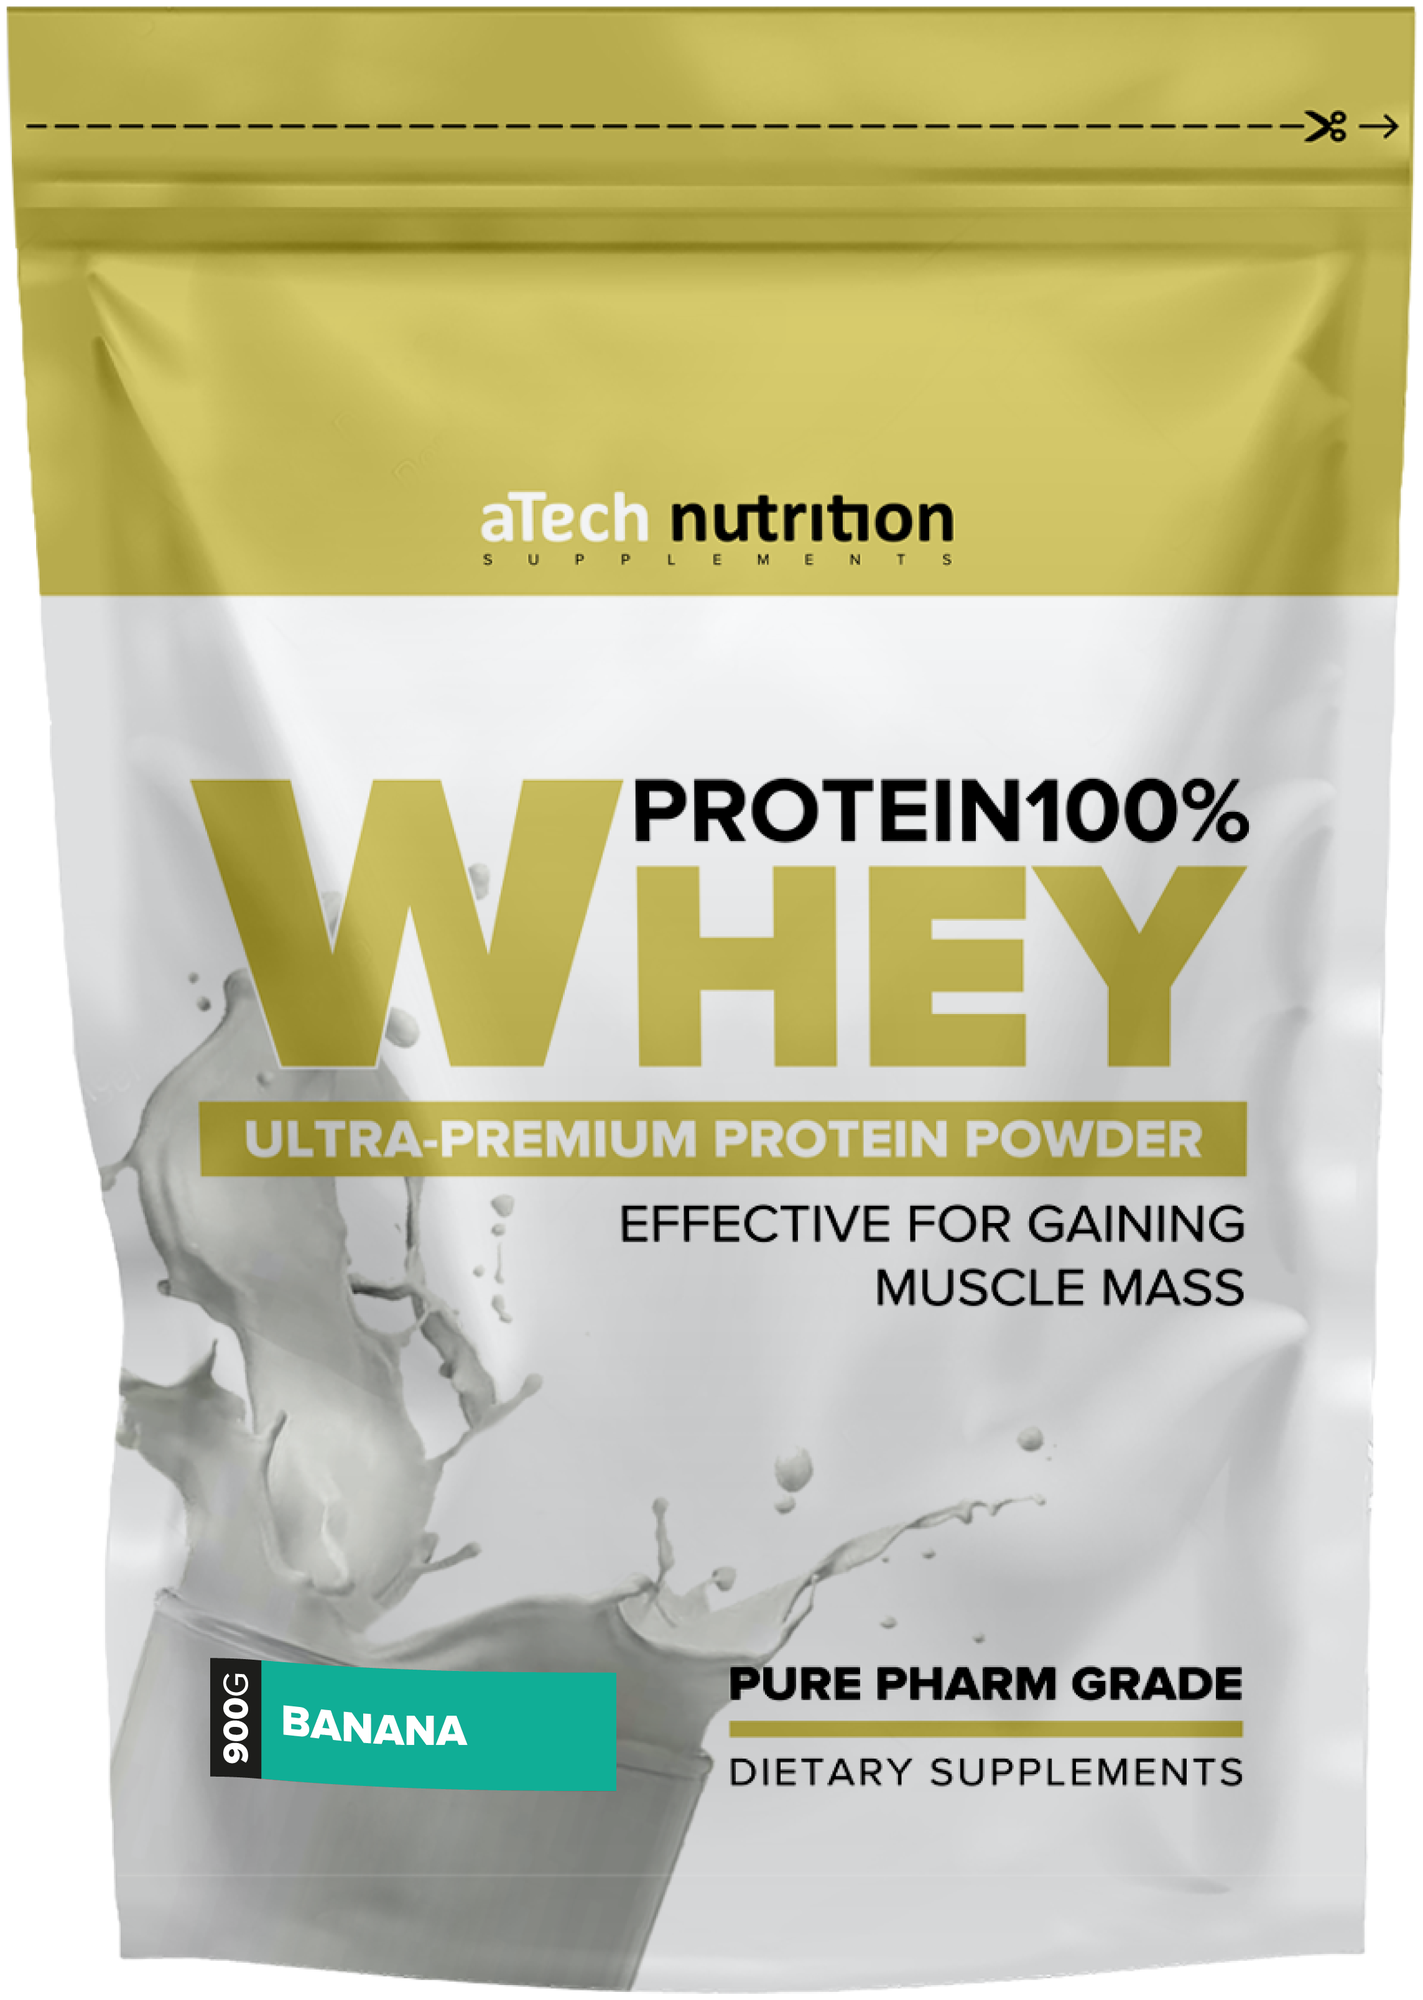       "  100%  " ("Whey protein 100% Special Series")  0,9    ""